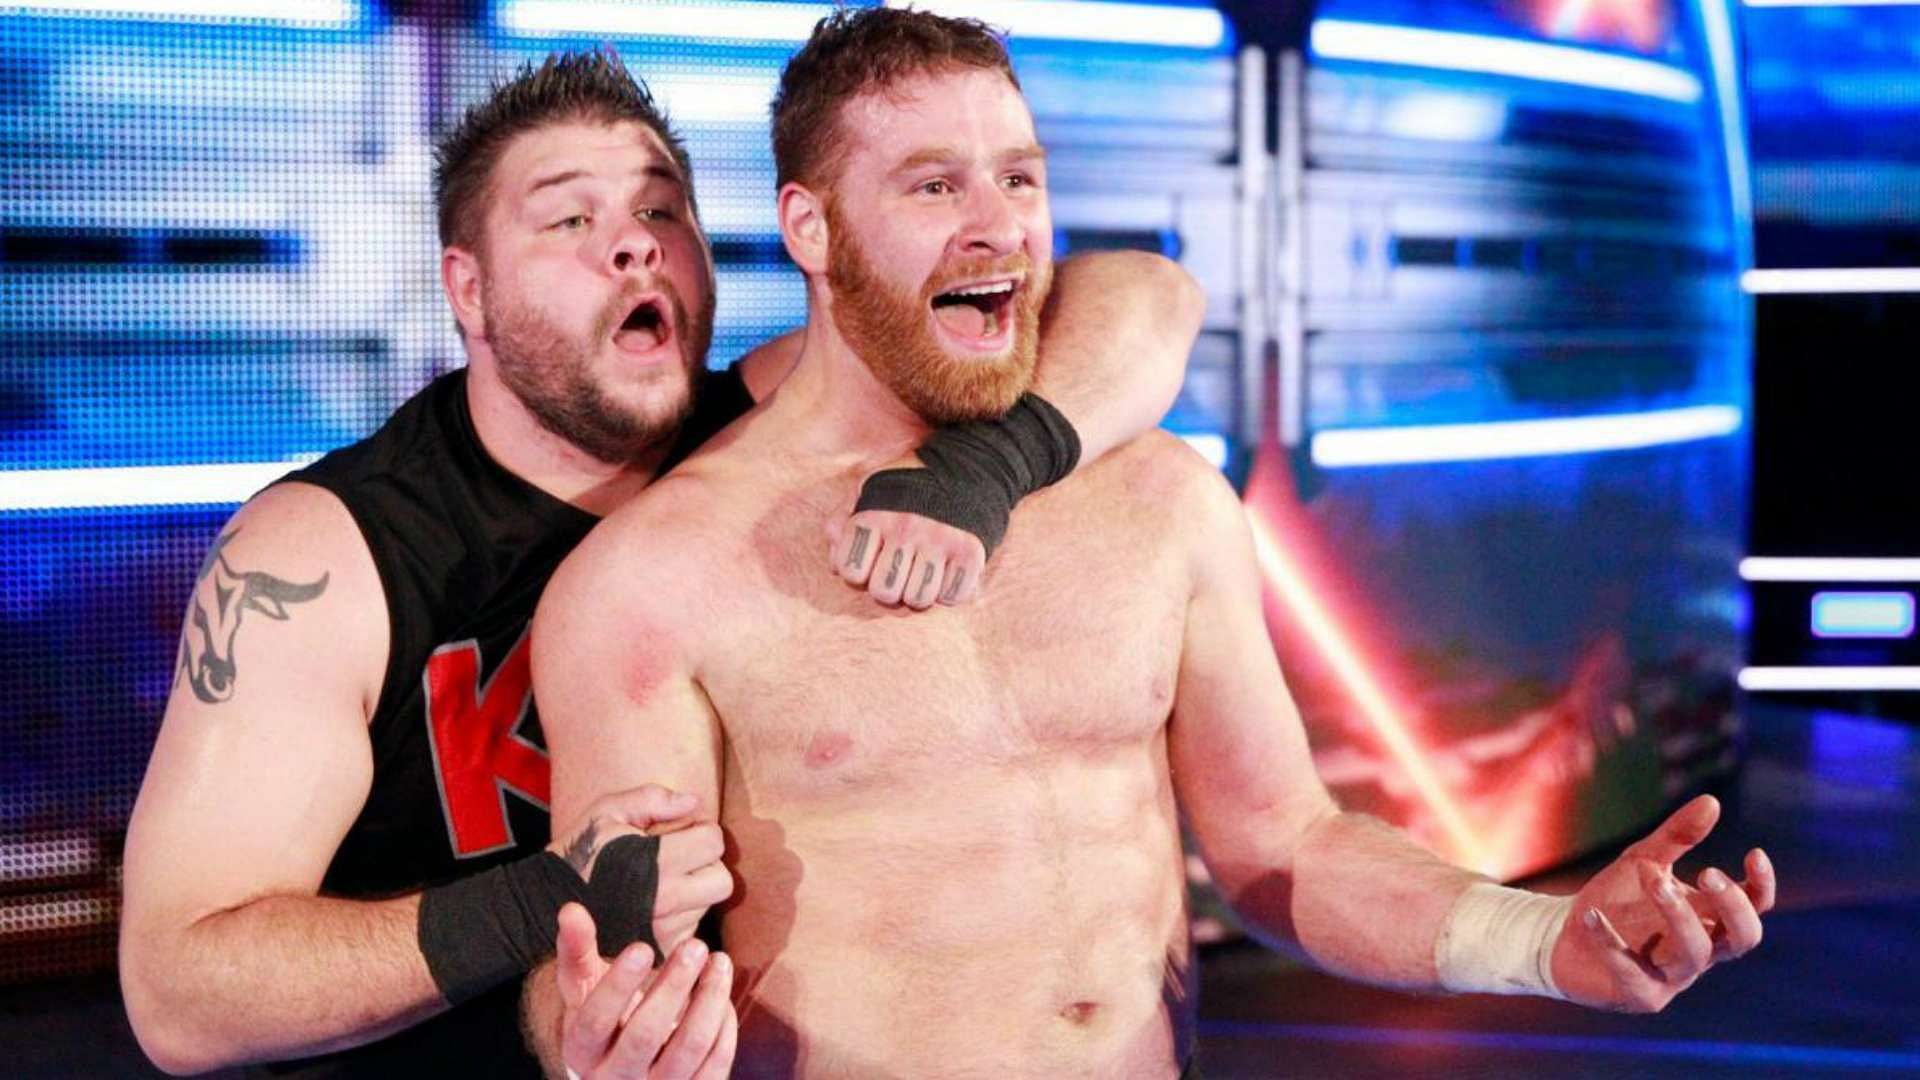 Can Sami Zayn watch his real-life best friend lose his livelihood?